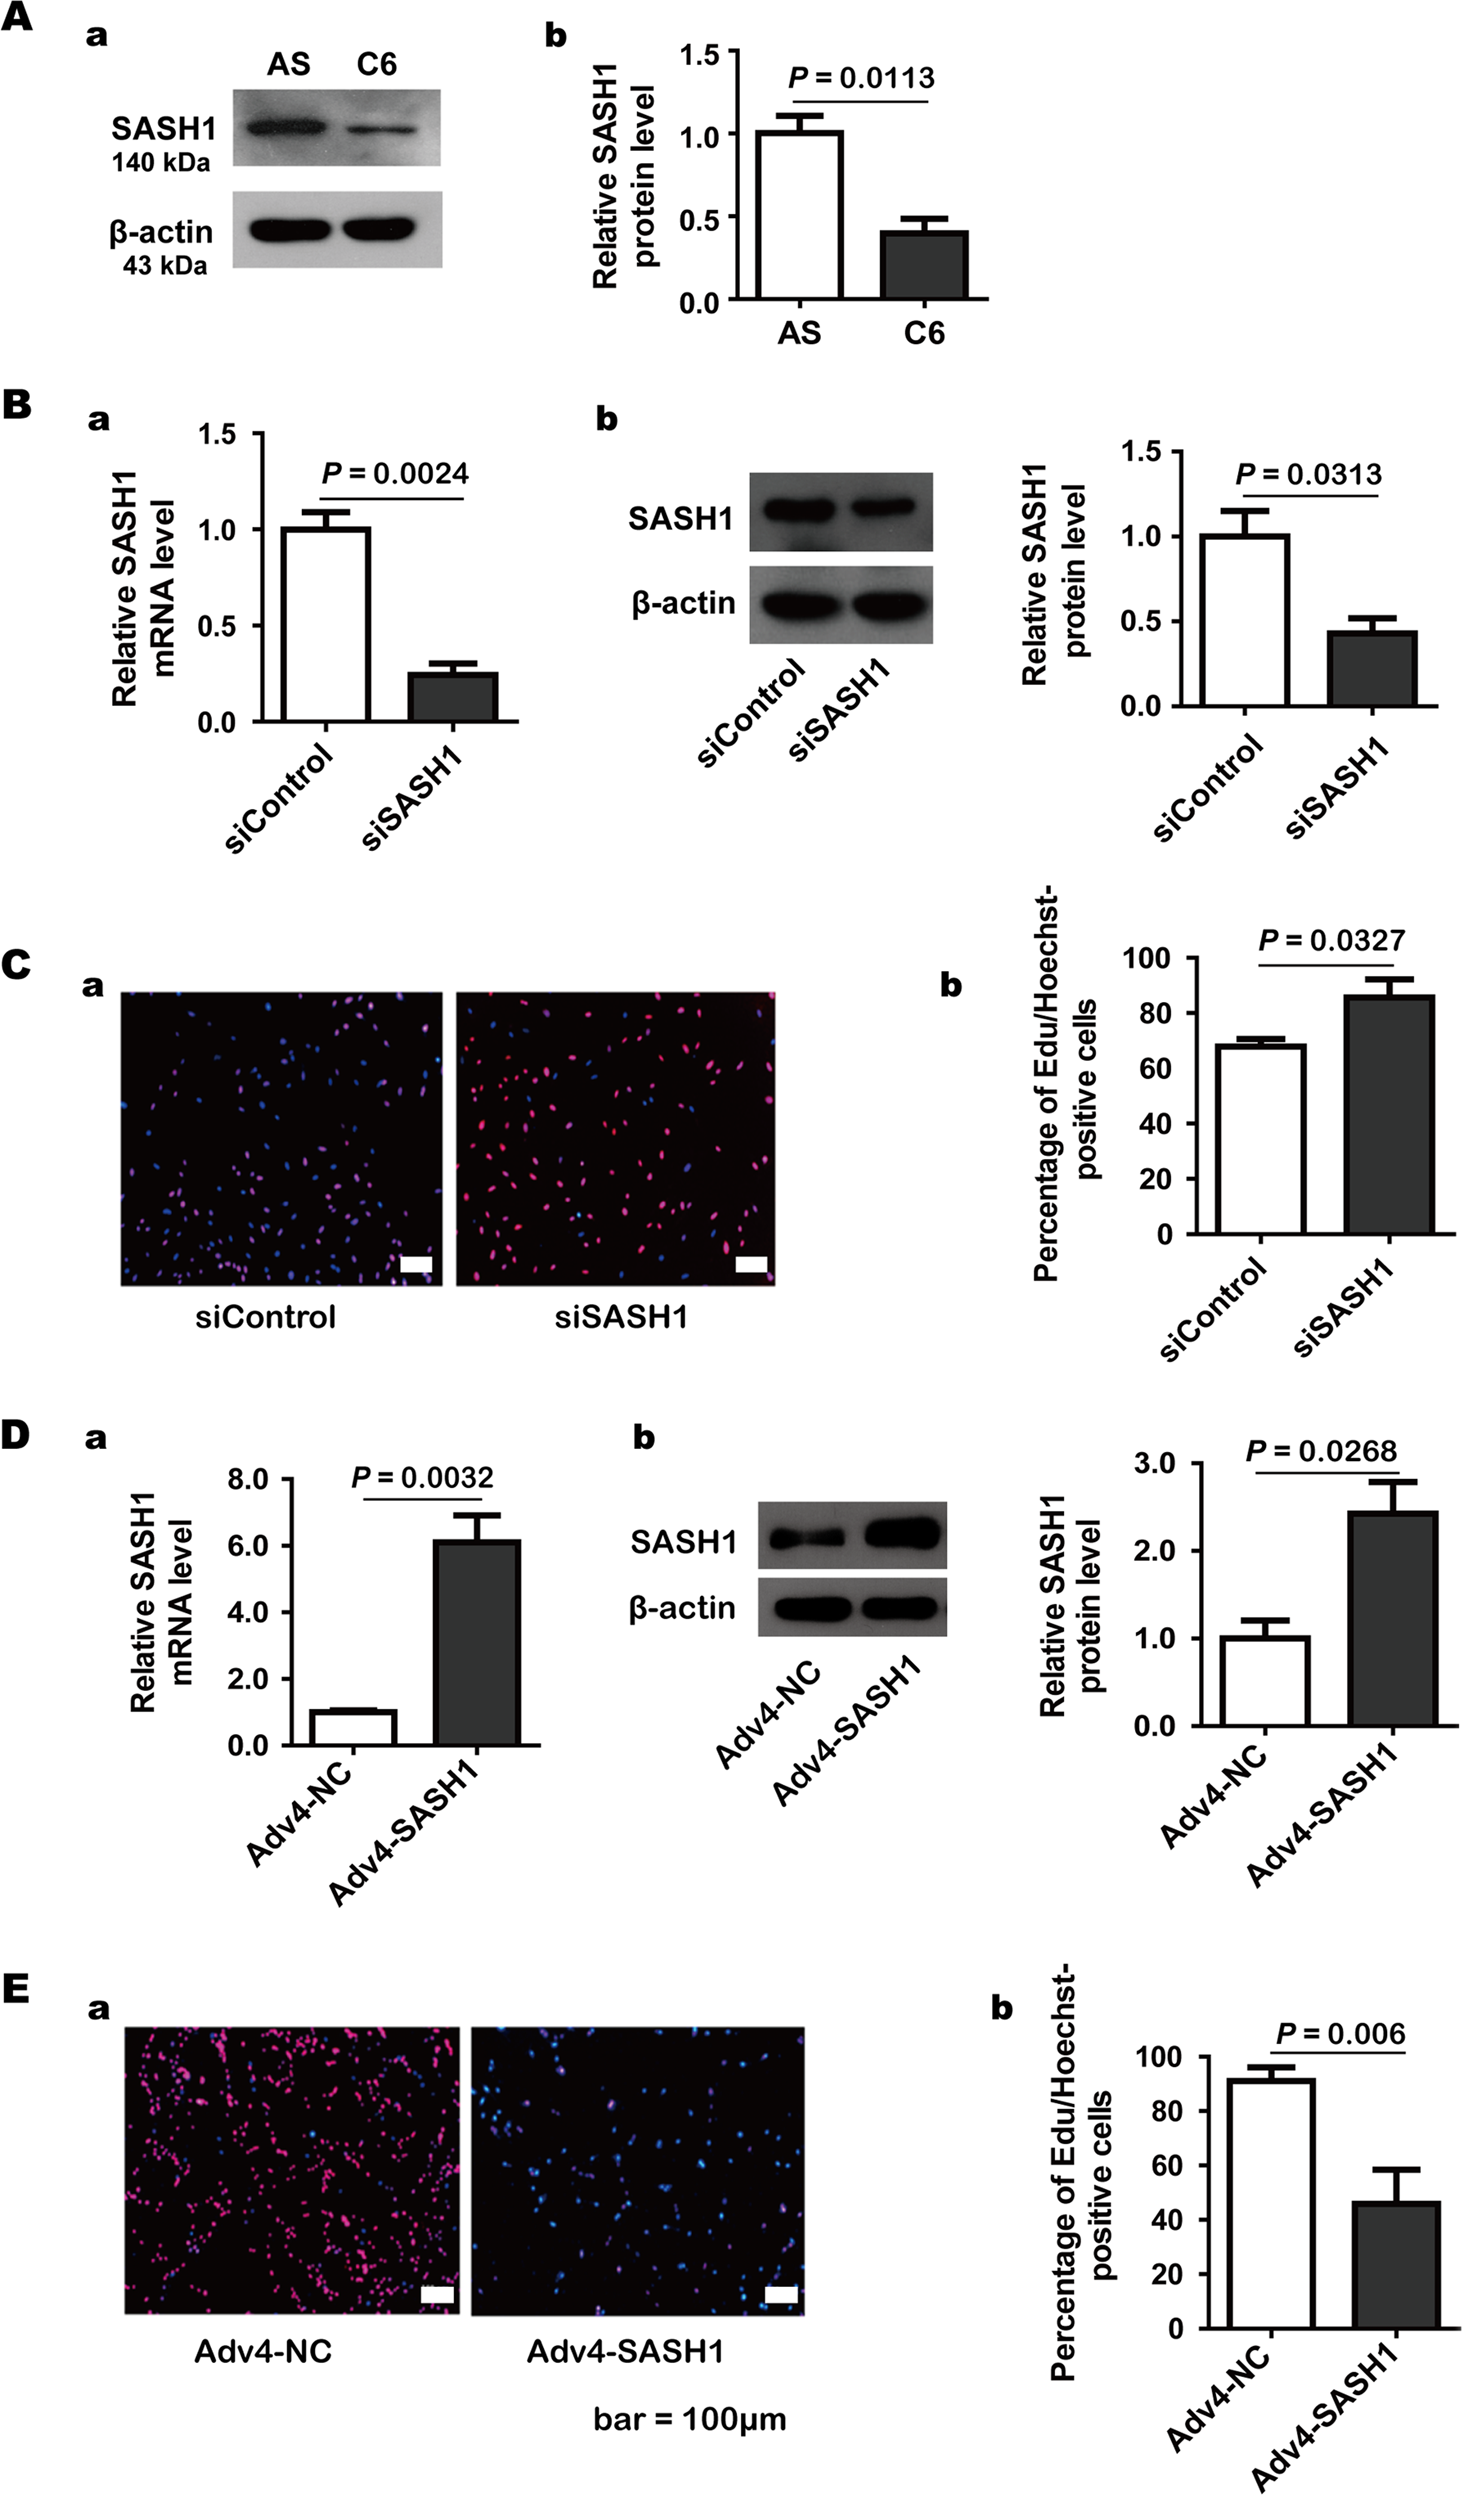 HMGB1 contributes to SASH1 methylation to attenuate astrocyte adhesion |  Cell Death & Disease